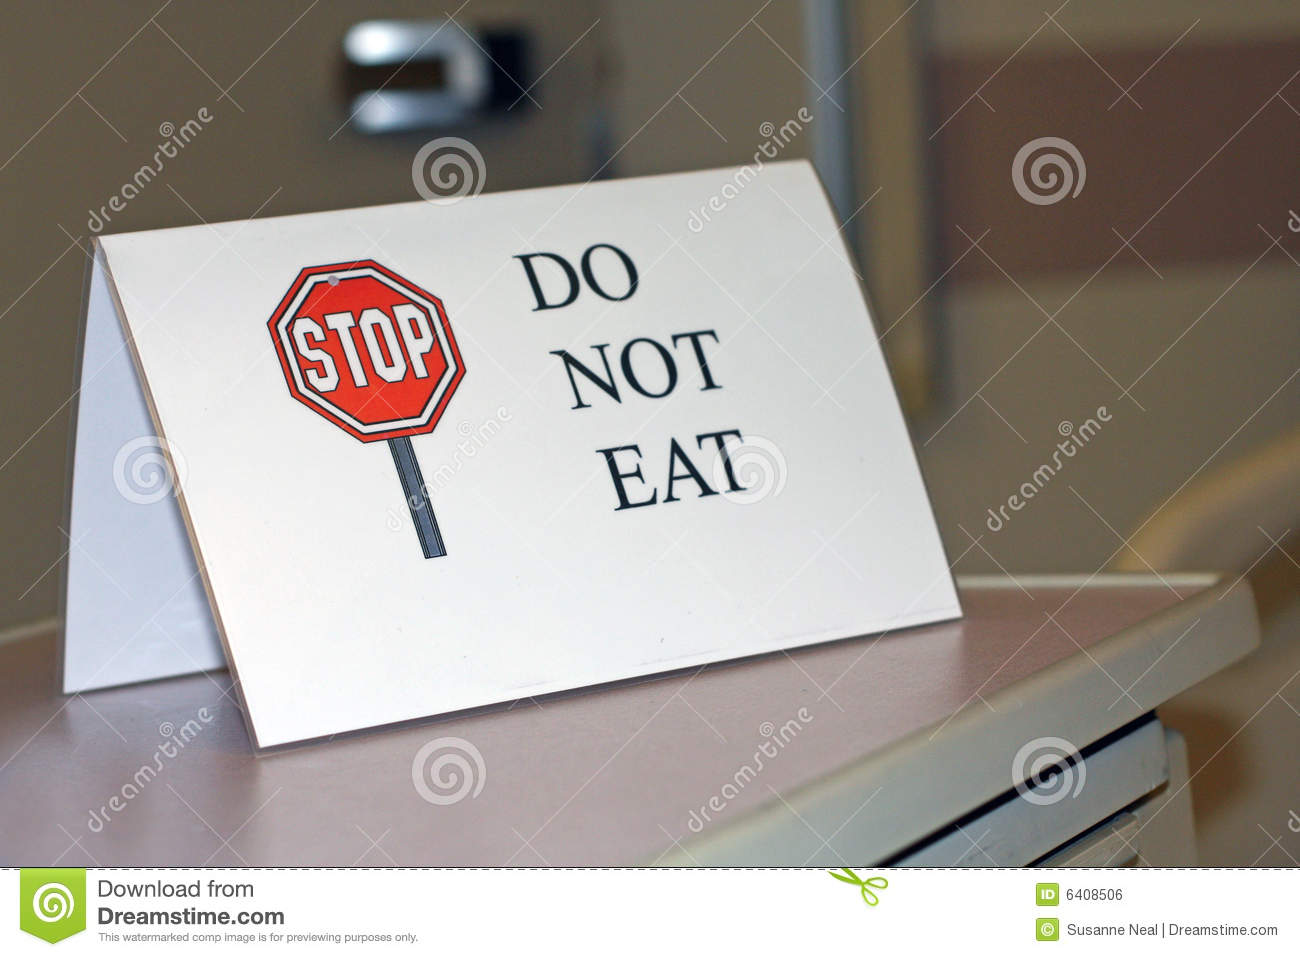 Sign Says Do Not Eat Royalty Free Stock Image   Image  6408506